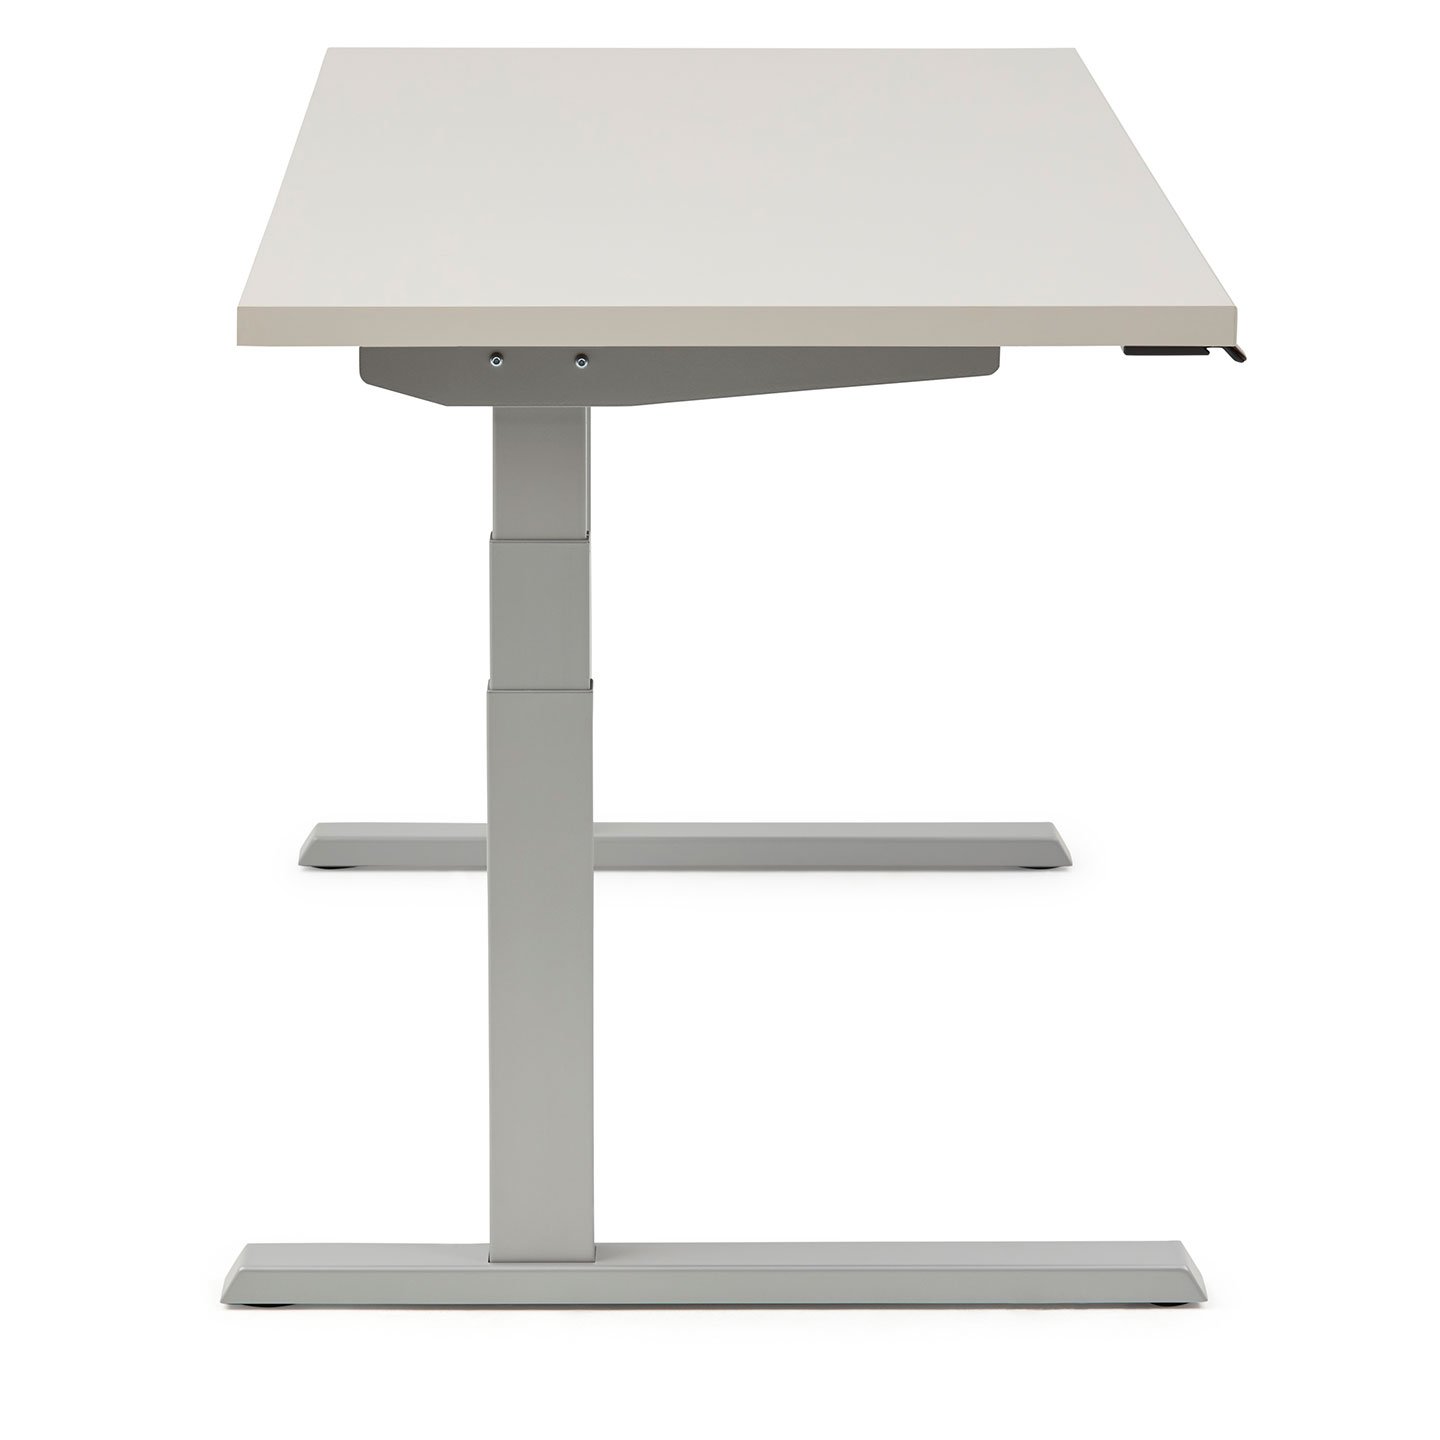 Haworth Upside Height Adjustable Table with chalk rectangular top and steel legs